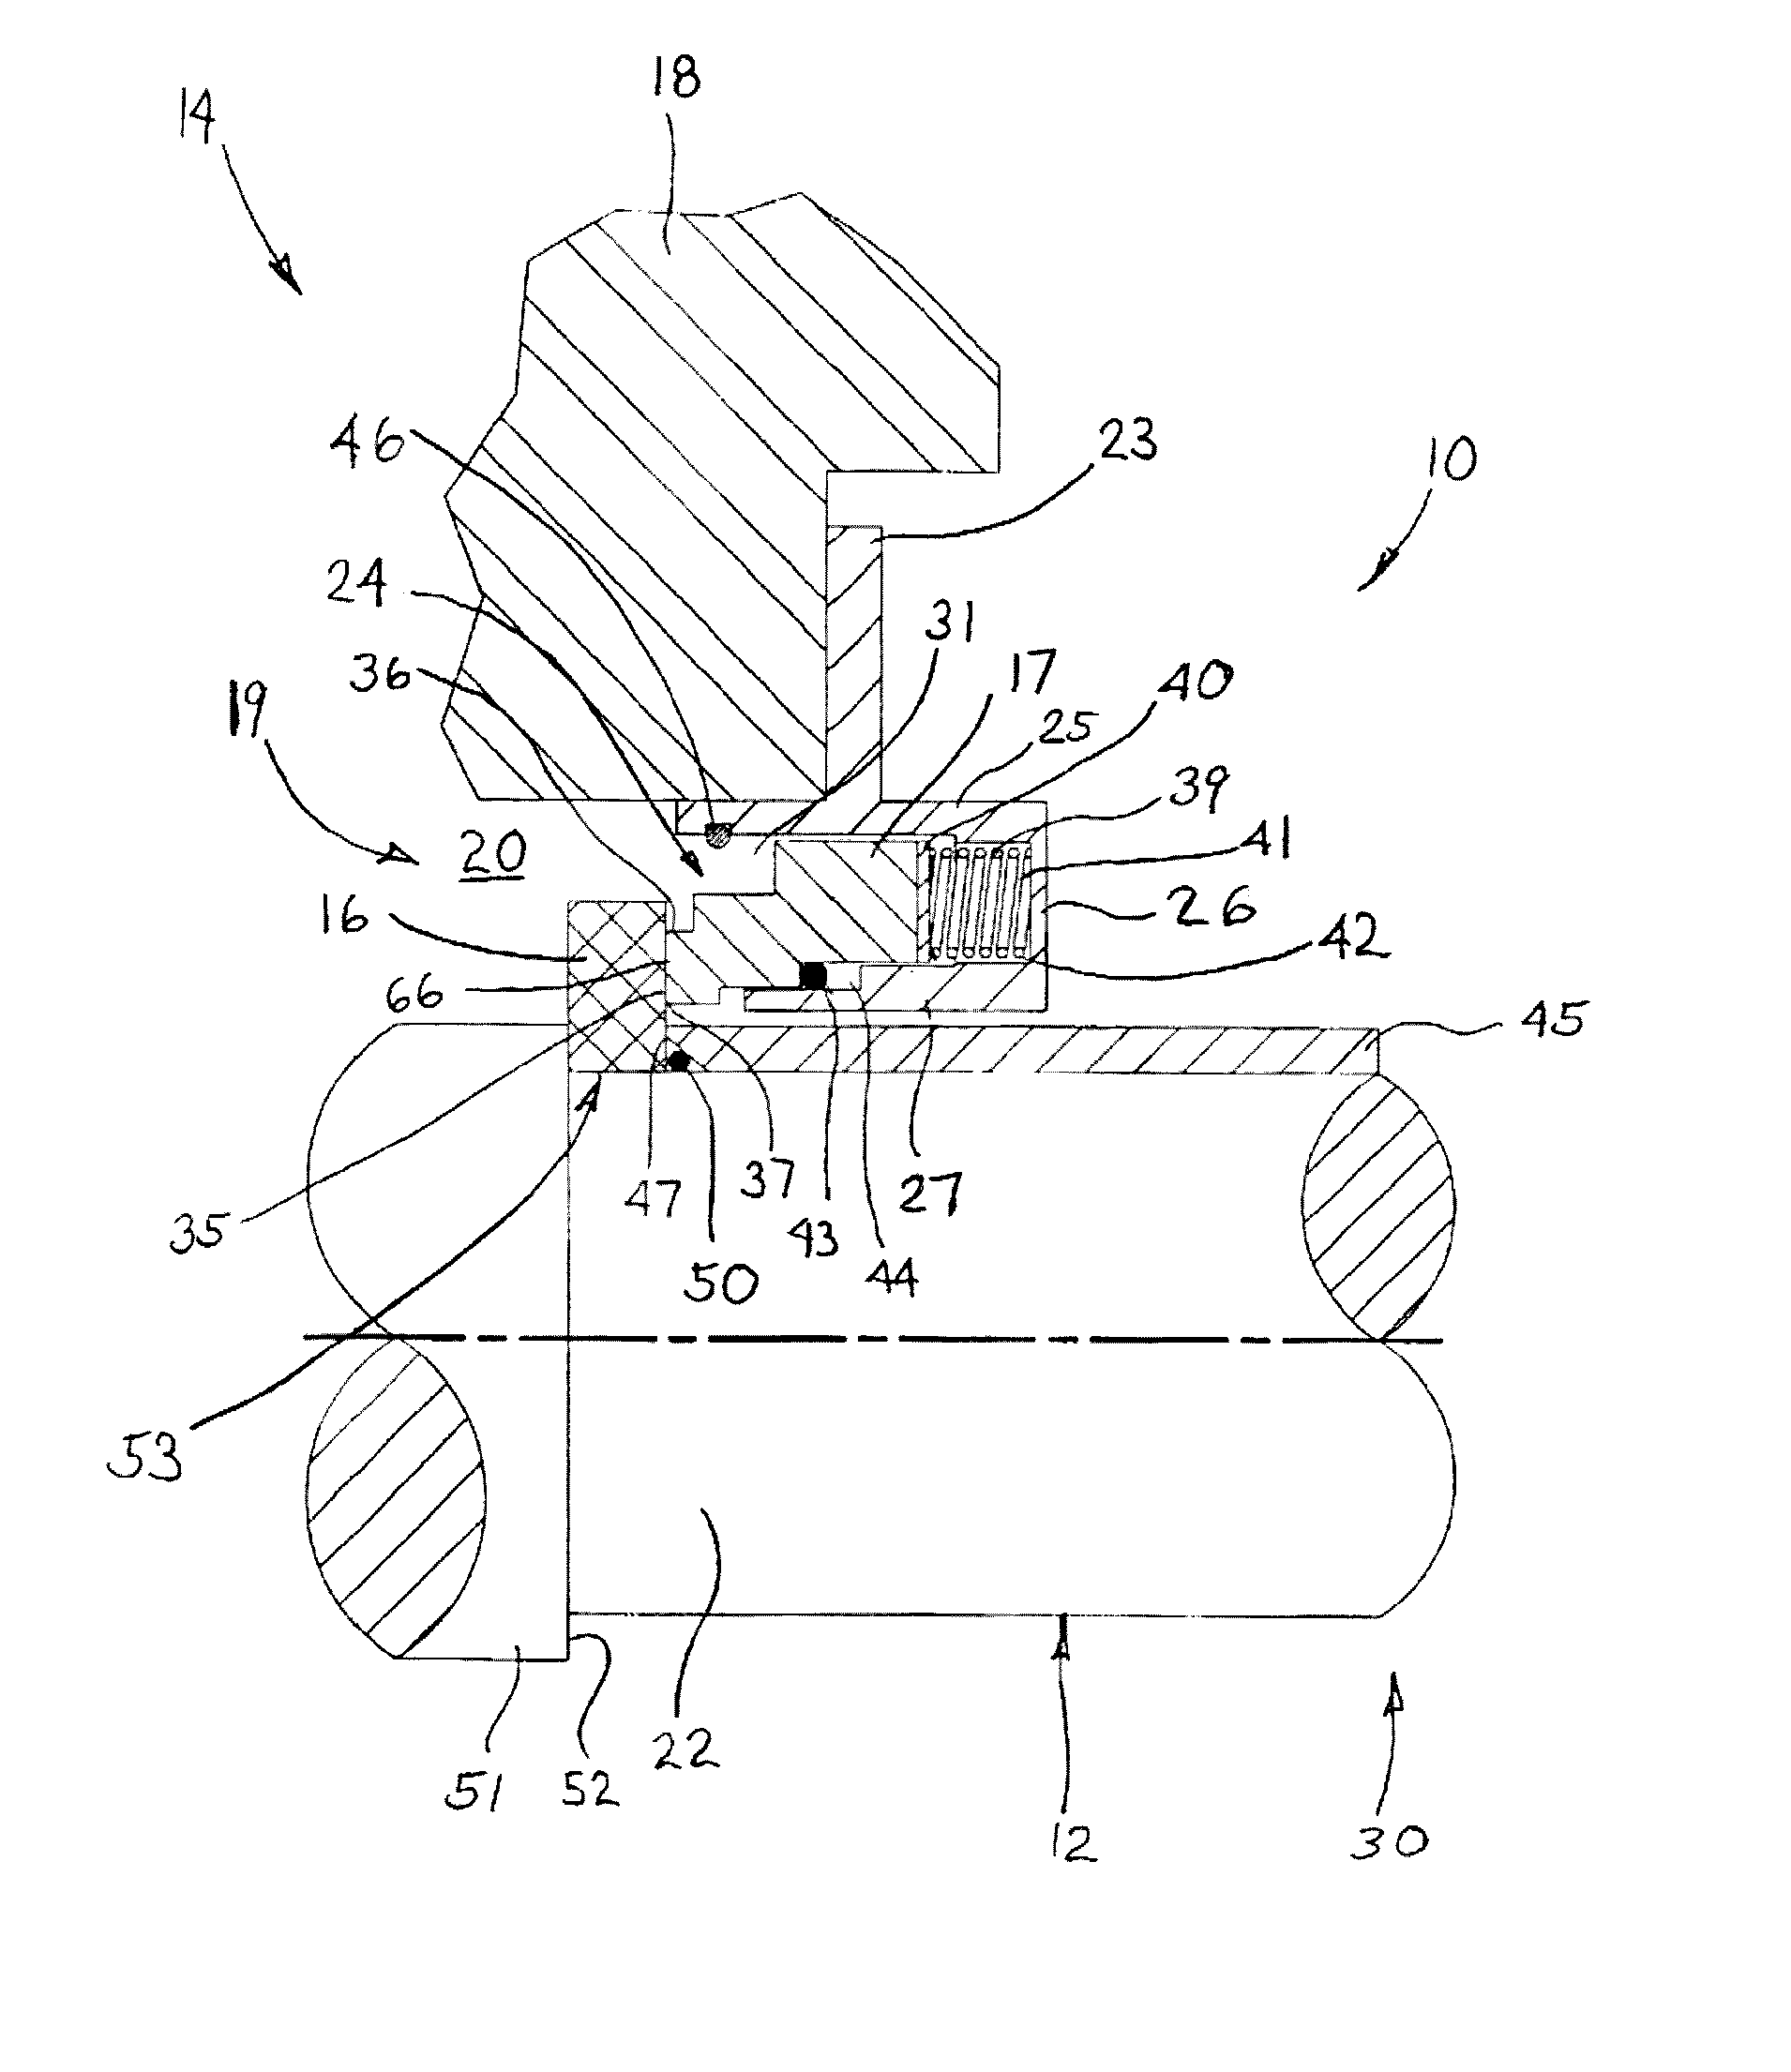 Mechanical face seal with a reverse trapezoidal face pattern